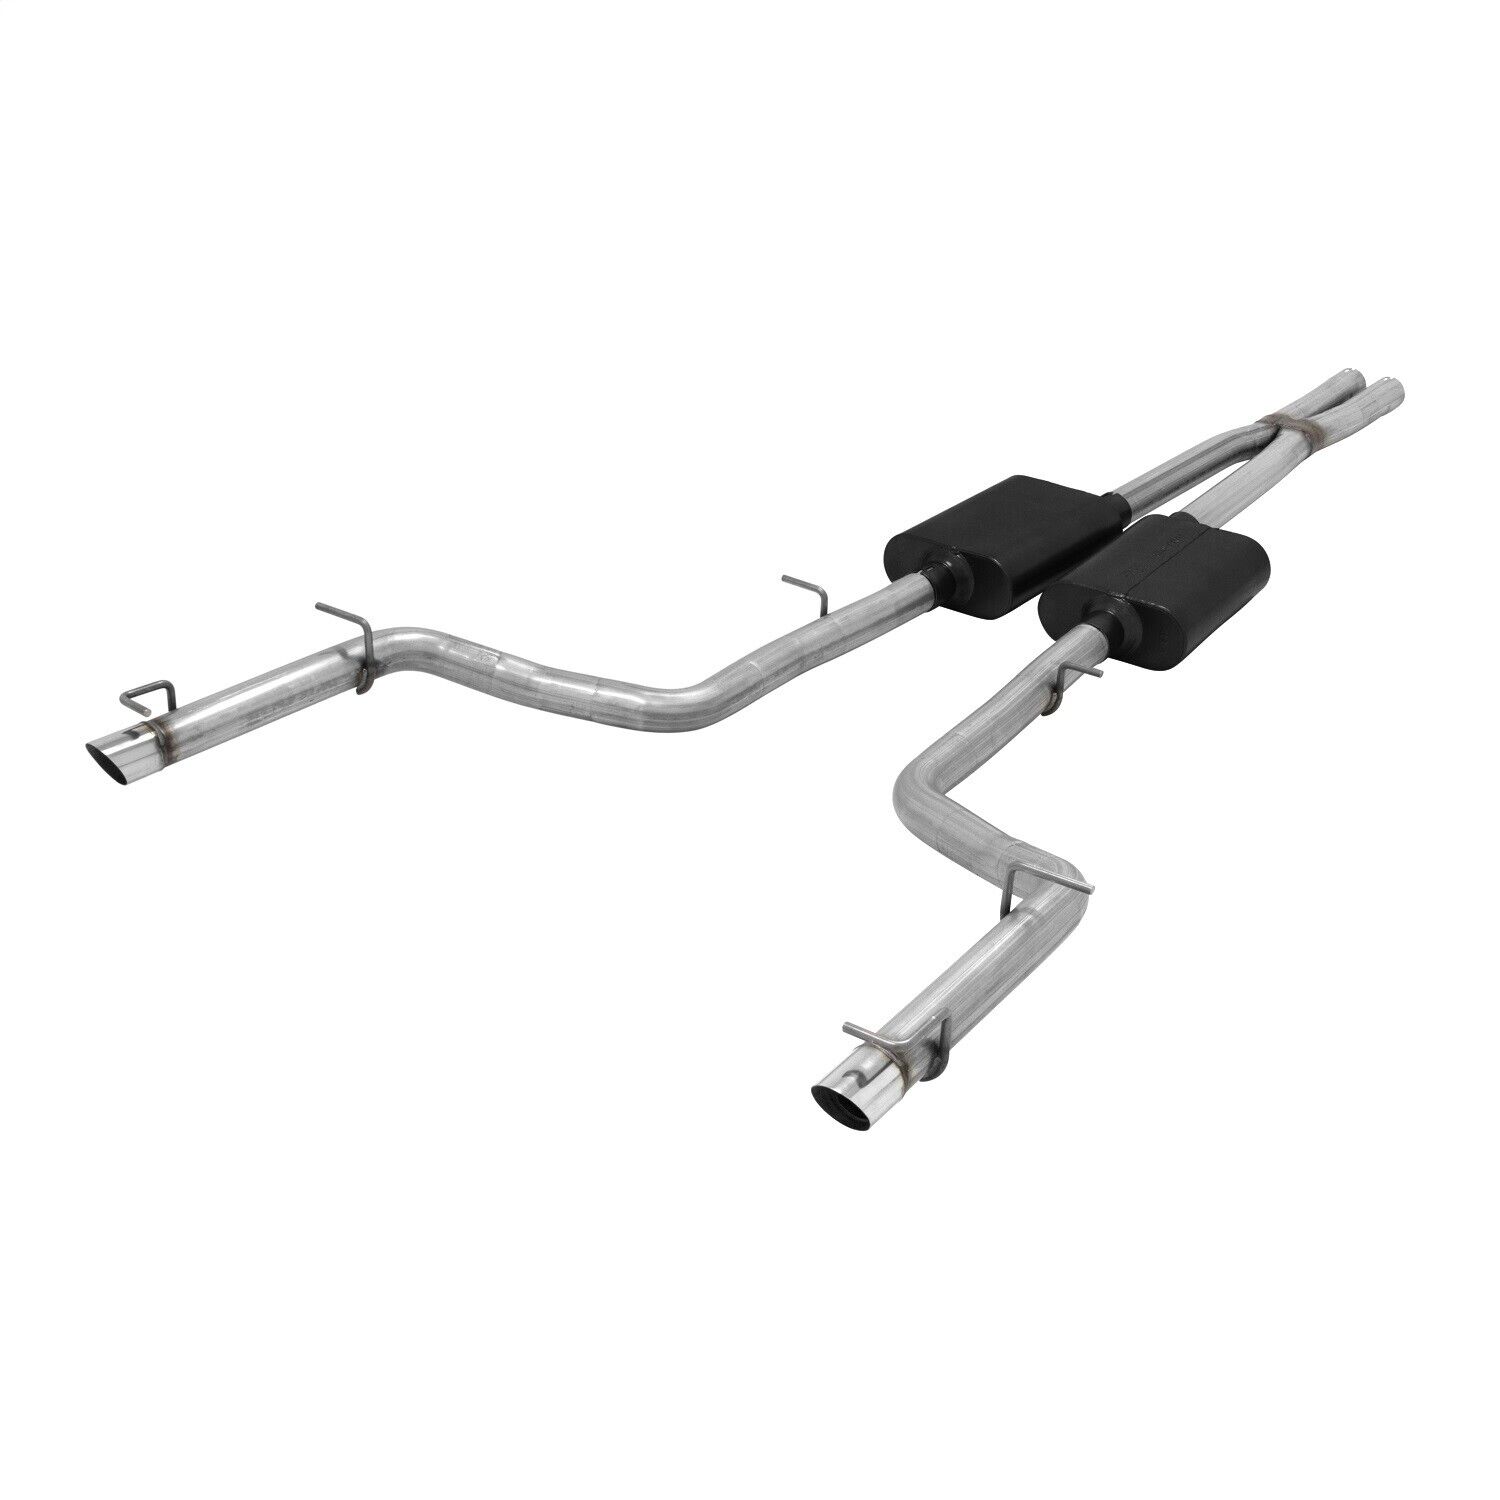 Flowmaster 817658 American Thunder Cat Back Exhaust System Fits 300 Charger